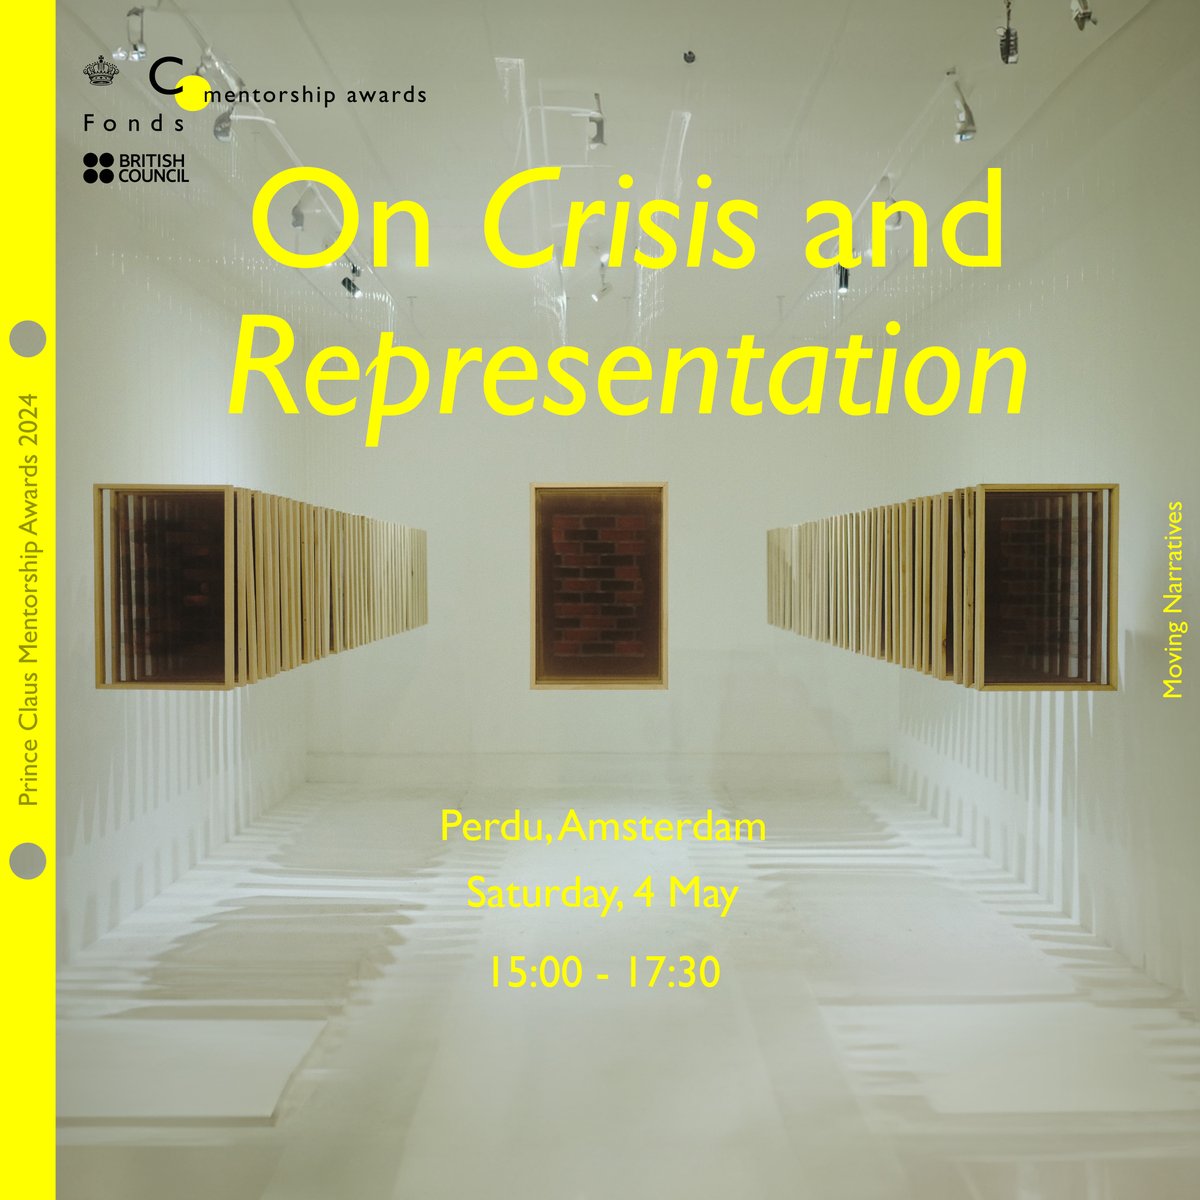 Join us on the 4th of May from 14:30 for the public event 'On Crisis and Representation' featuring the cohort of Cycle 1 of the Mentorship Award: Moving Narratives at Perdu in Amsterdam. The event is free of charge - please RSVP here: loom.ly/eFyhRV4